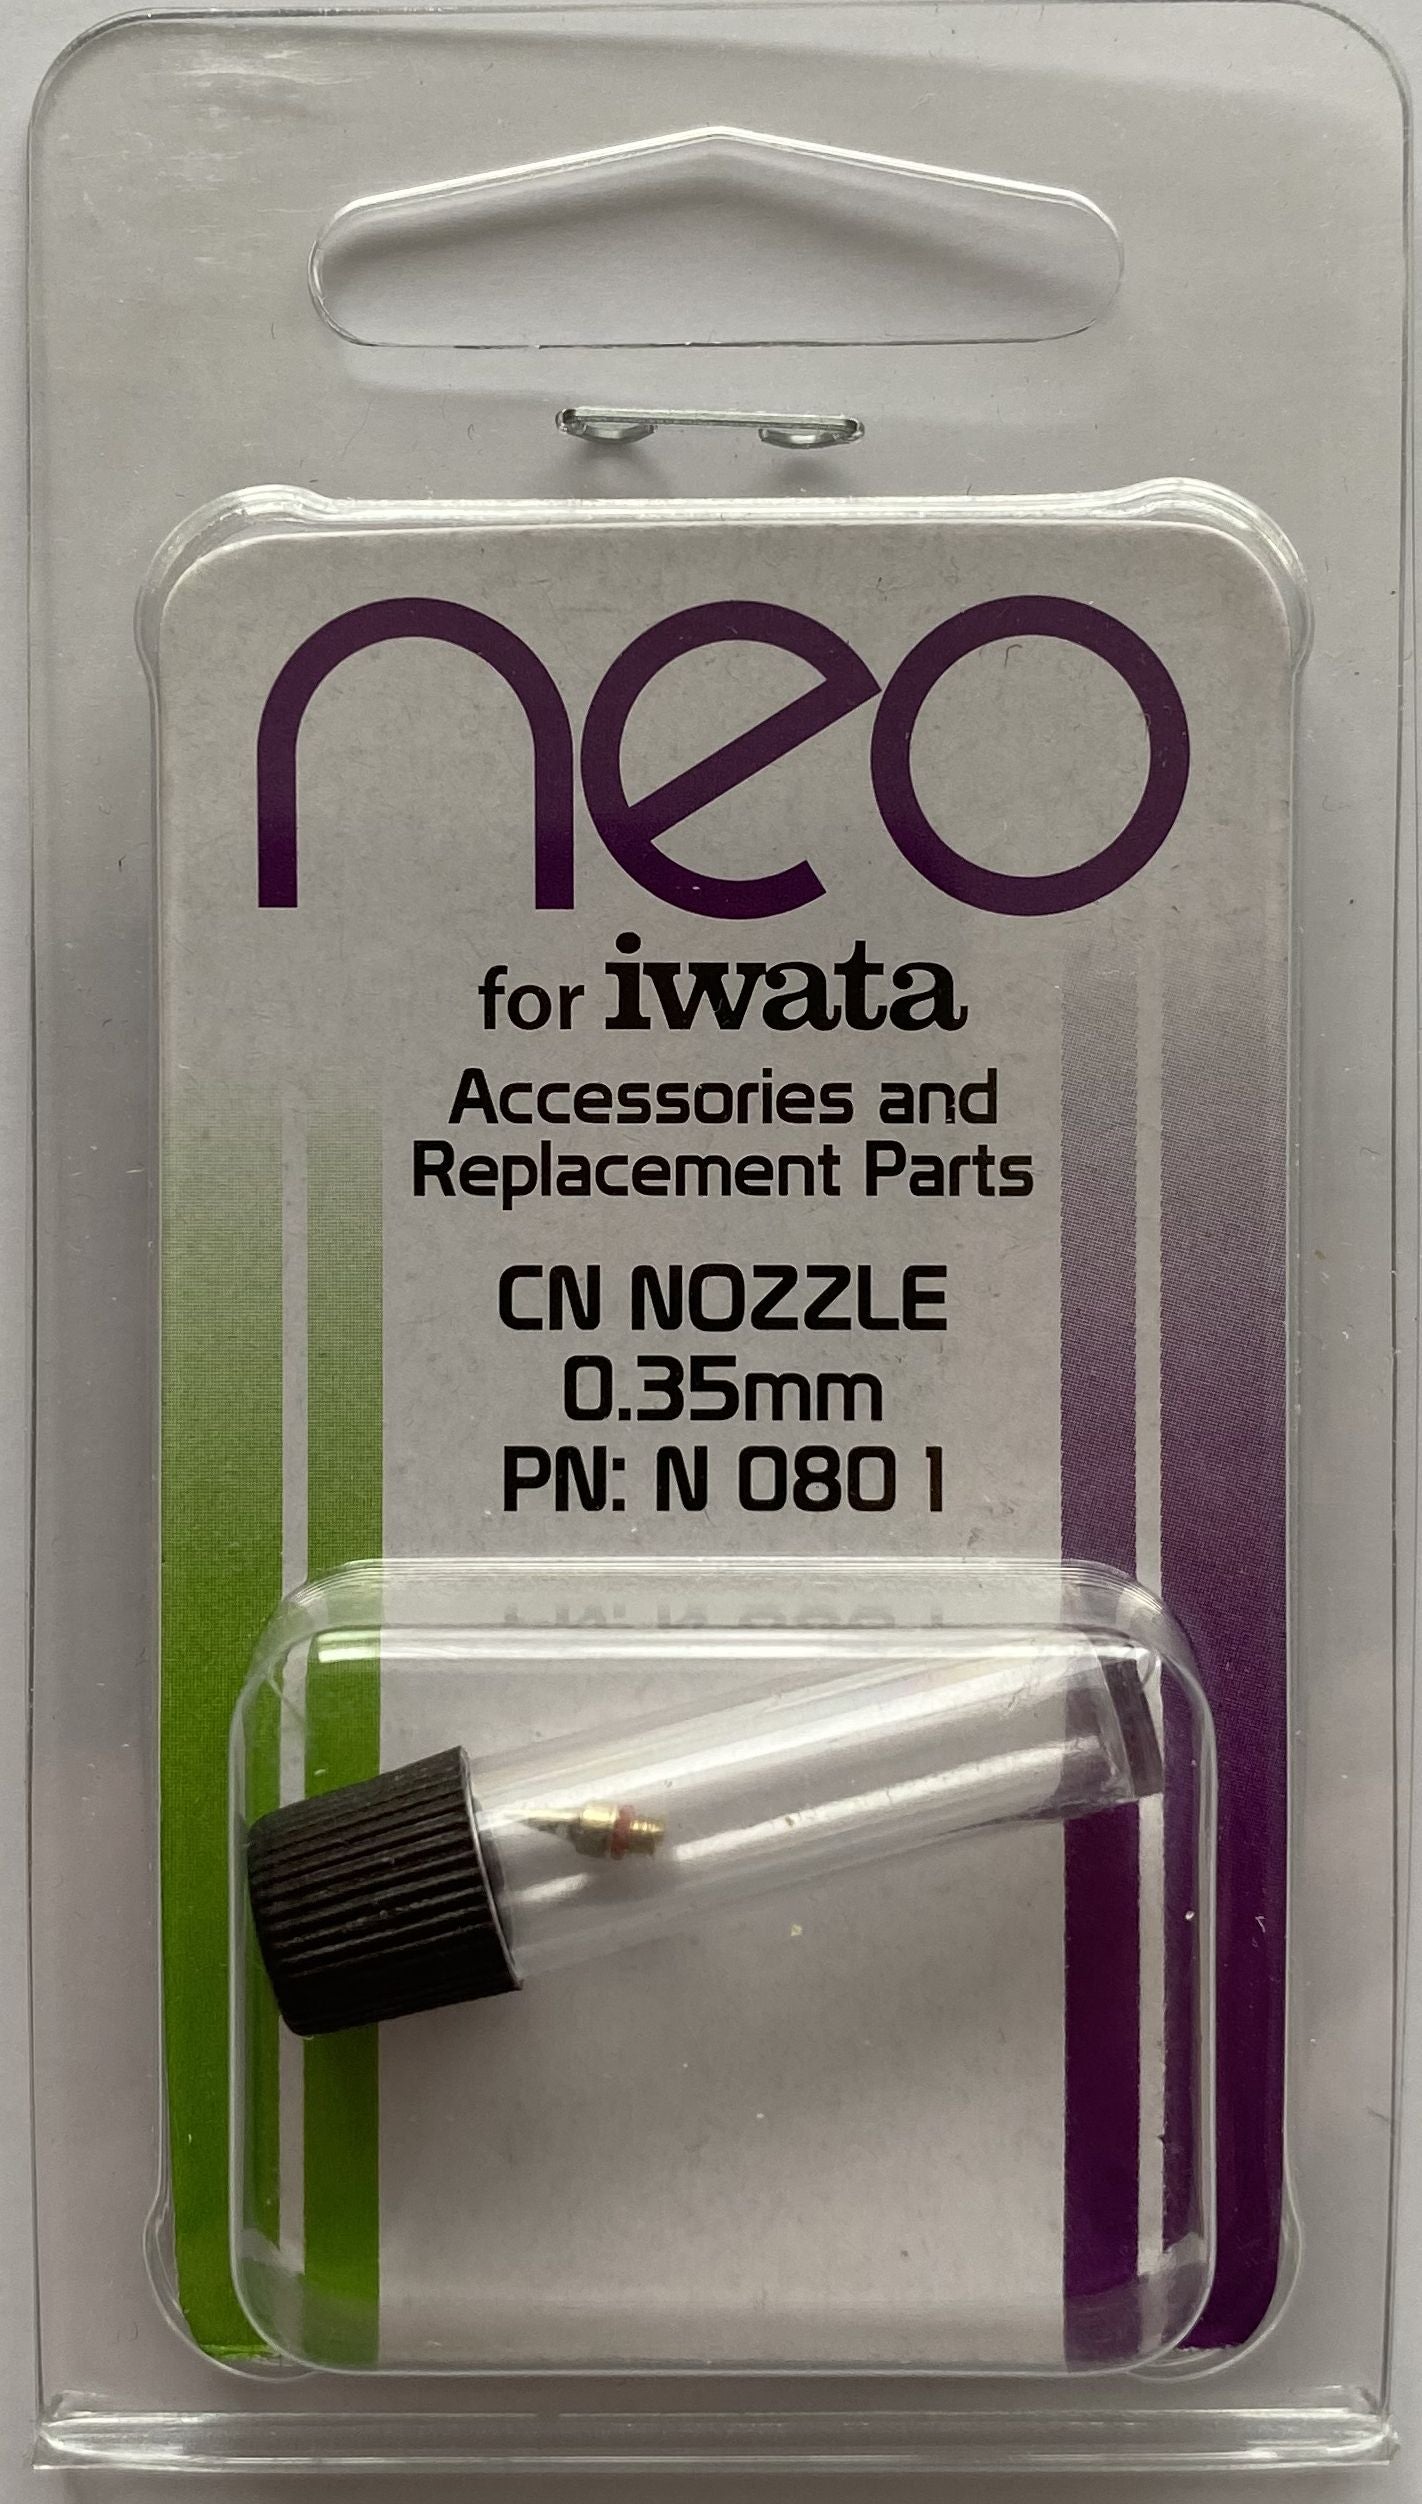 Iwata N0801 Airbrush Nozzle (N3) 0.35mm with o-ring for Neo CN